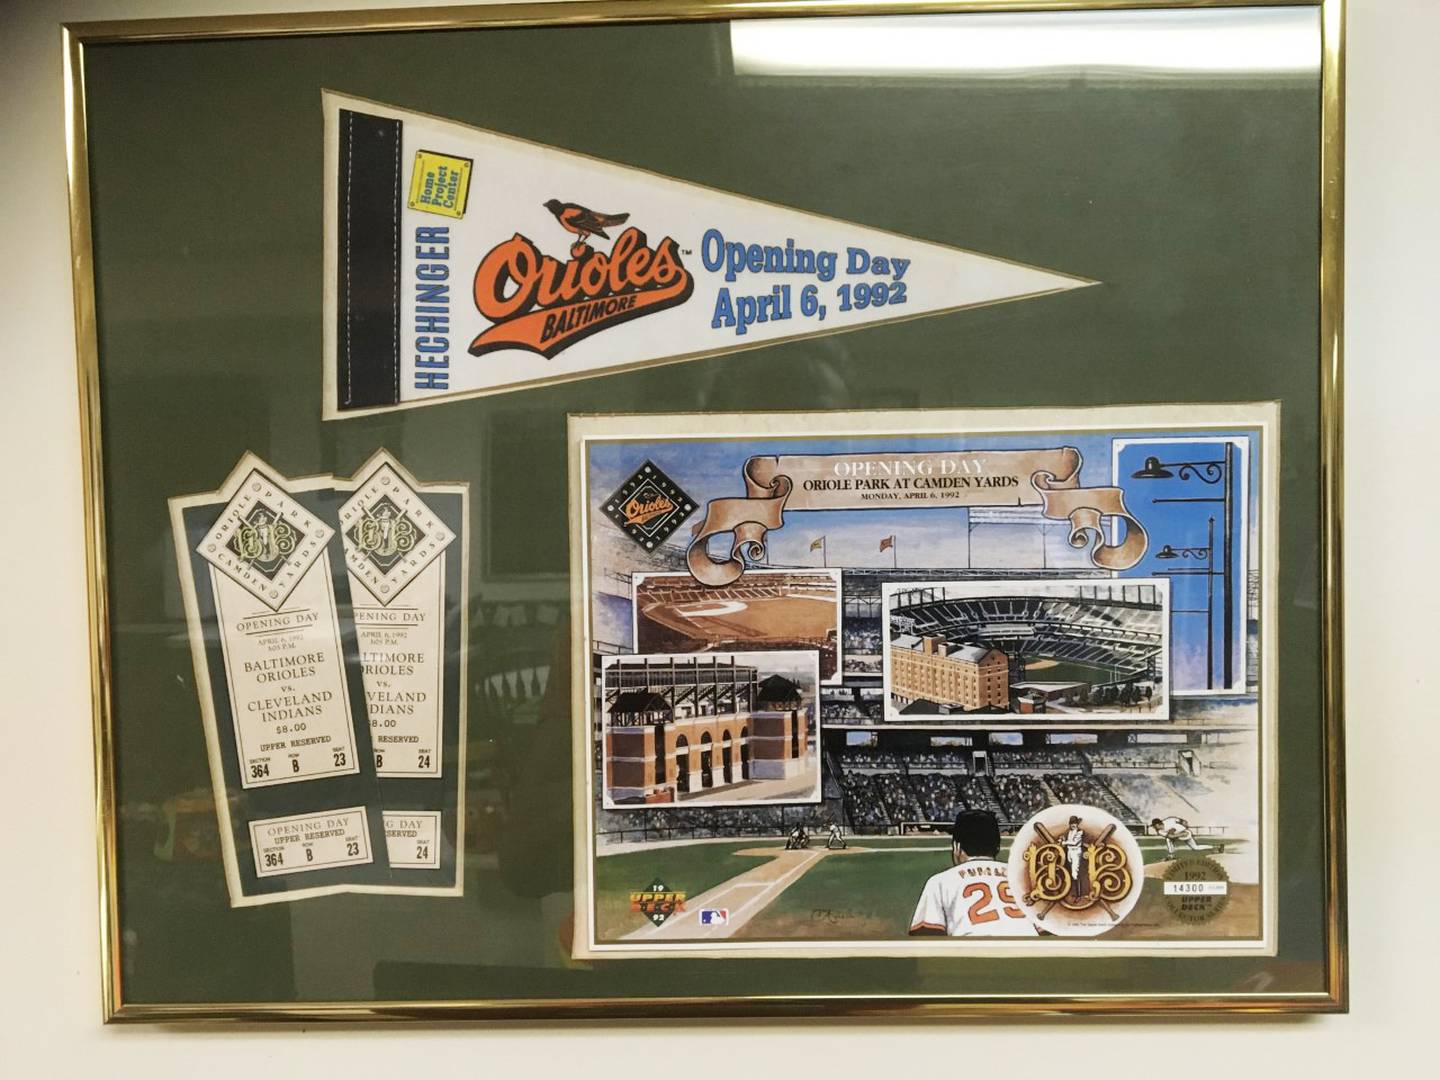 A framed Orioles pennant, tickets to the opening day game on April 6, 1992 and a print of an opening day poster.